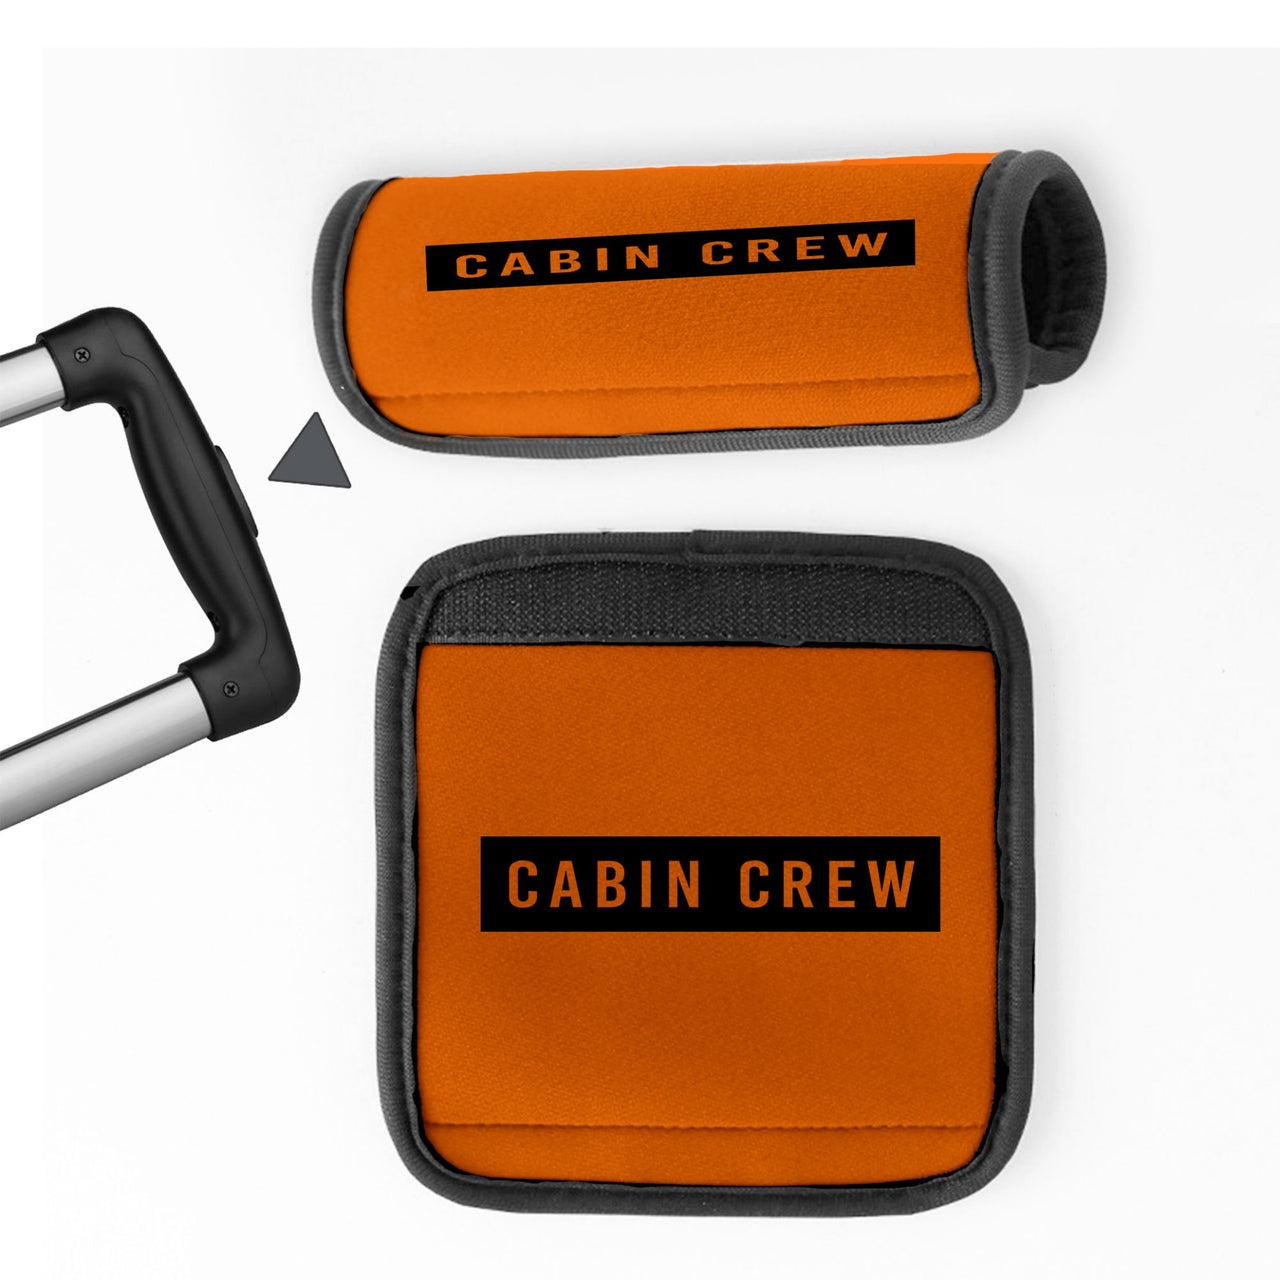 Cabin Crew Text Designed Neoprene Luggage Handle Covers